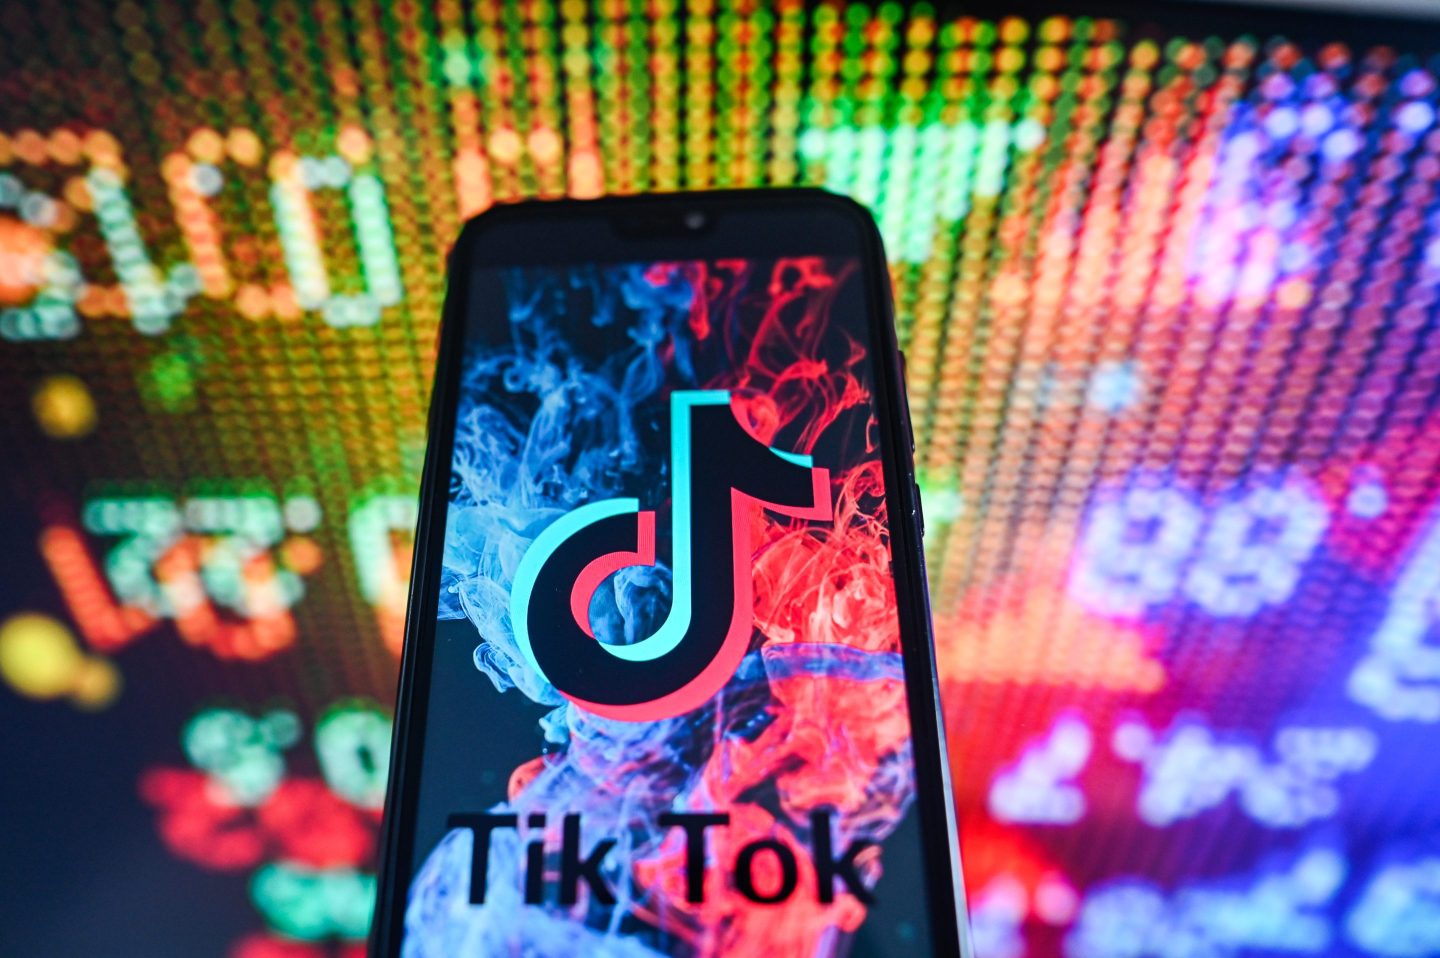 In this photo illustration a TikTok logo is displayed on a smartphone with stock market percentages in the background.